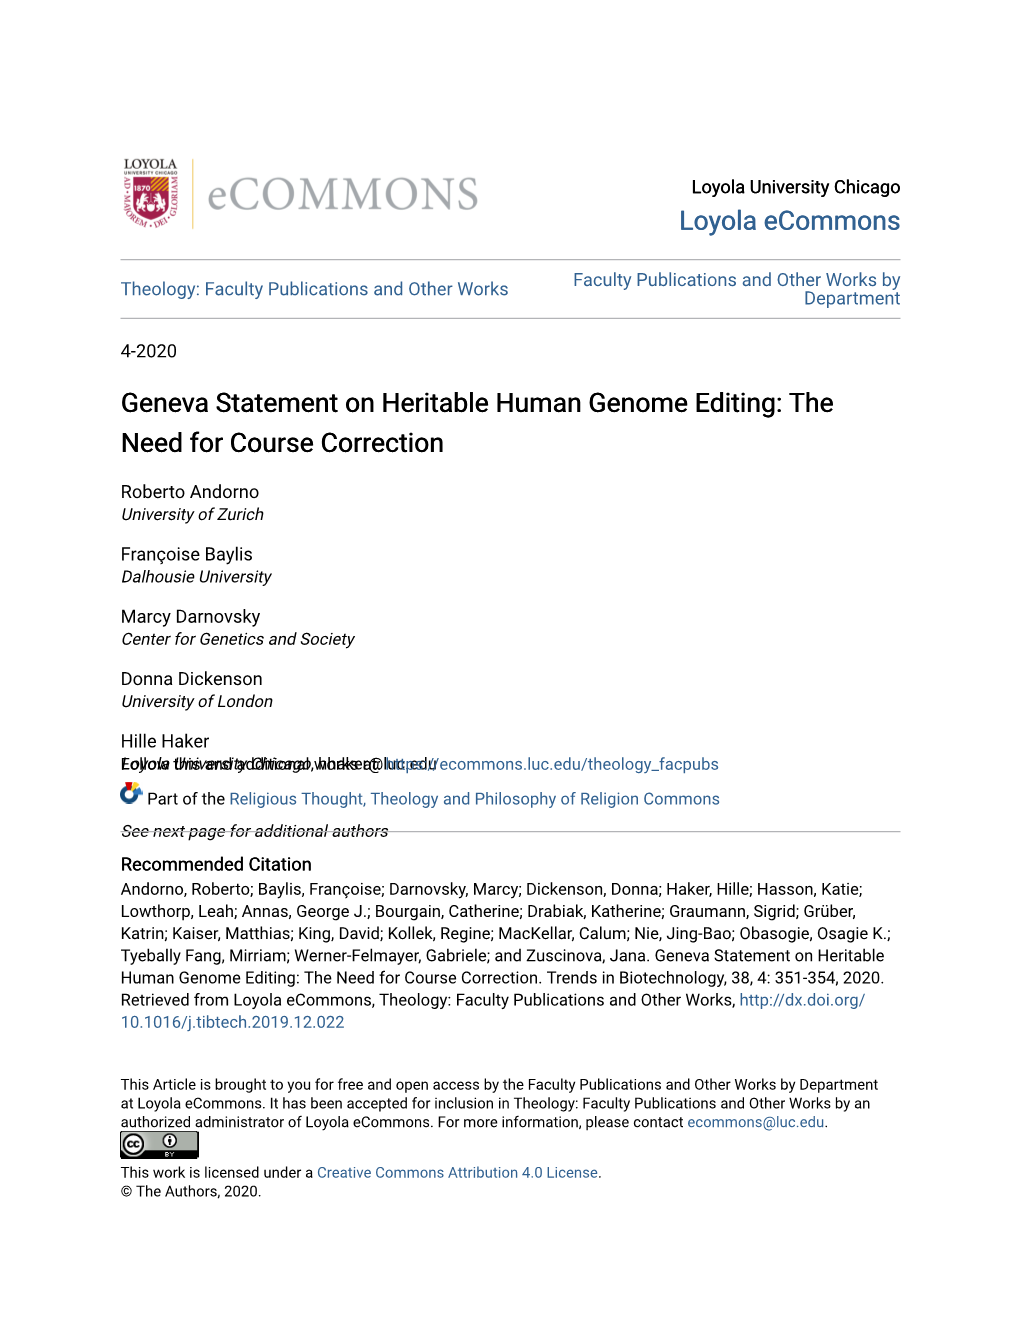 Geneva Statement on Heritable Human Genome Editing: the Need for Course Correction